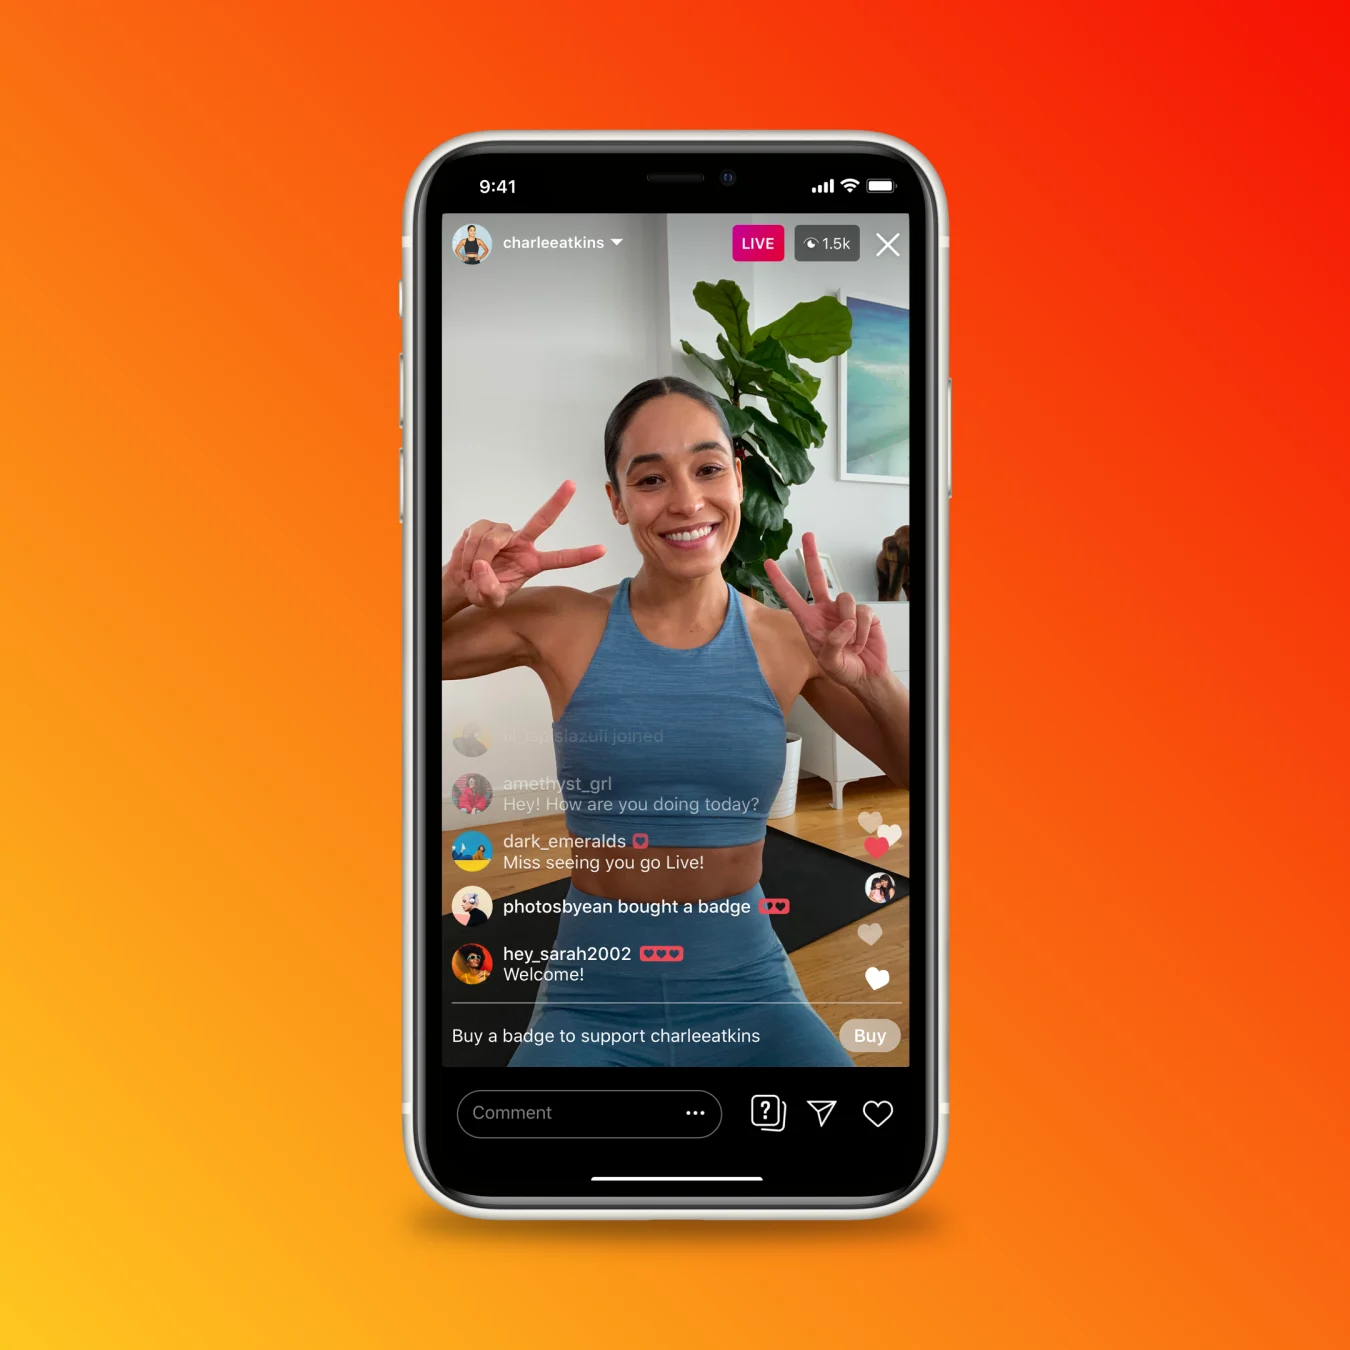 Instagram influencers will be able to sell badges in live streams.